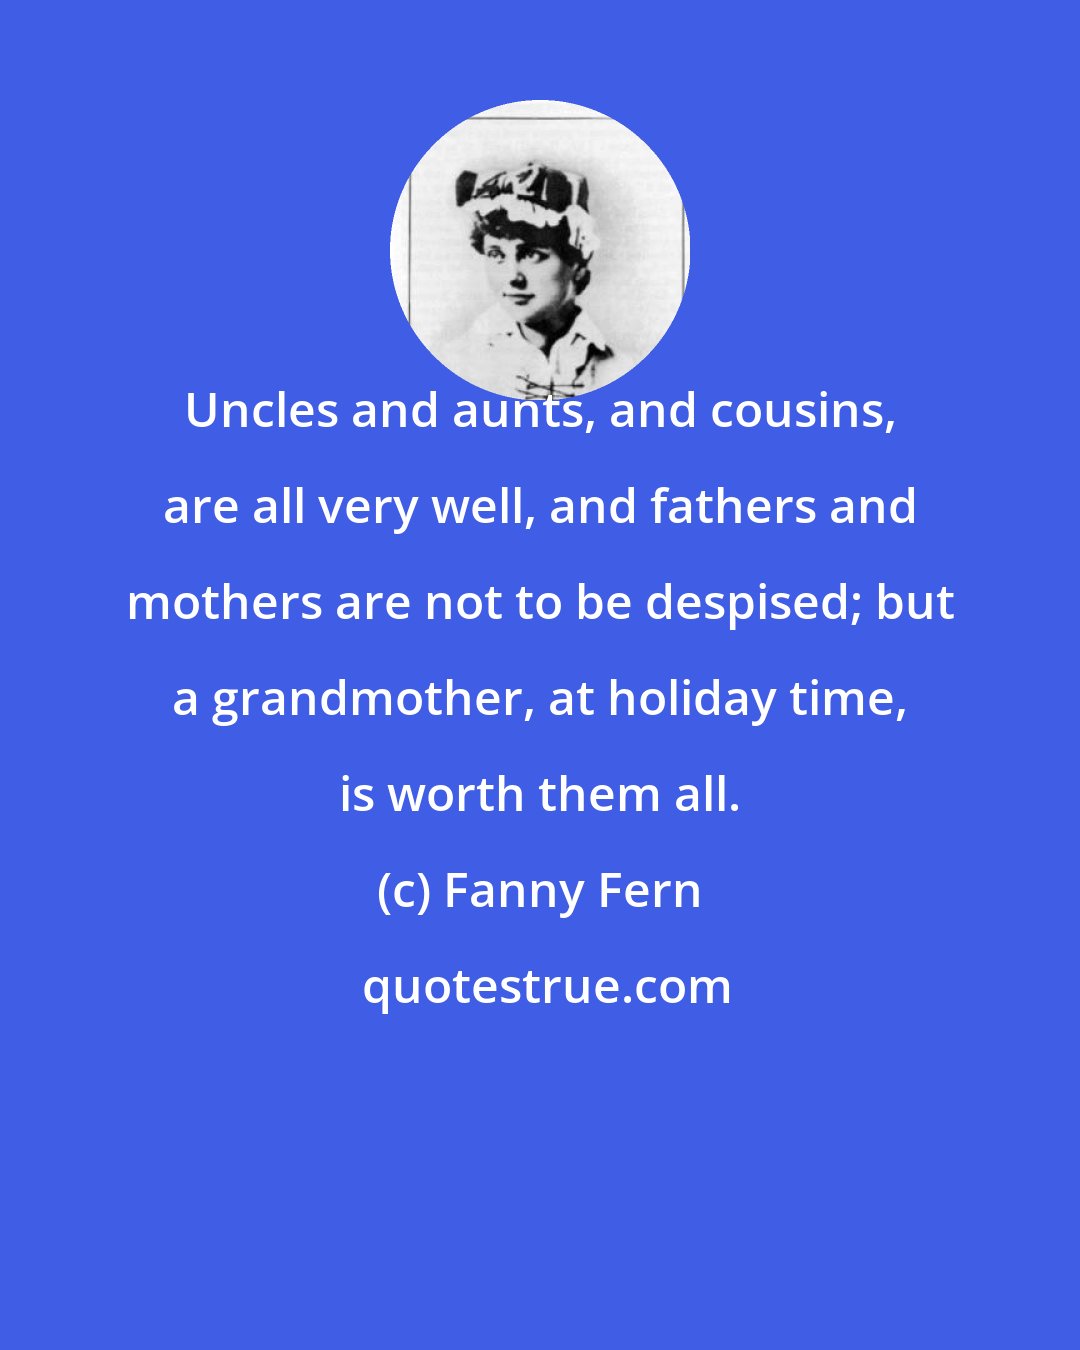 Fanny Fern: Uncles and aunts, and cousins, are all very well, and fathers and mothers are not to be despised; but a grandmother, at holiday time, is worth them all.